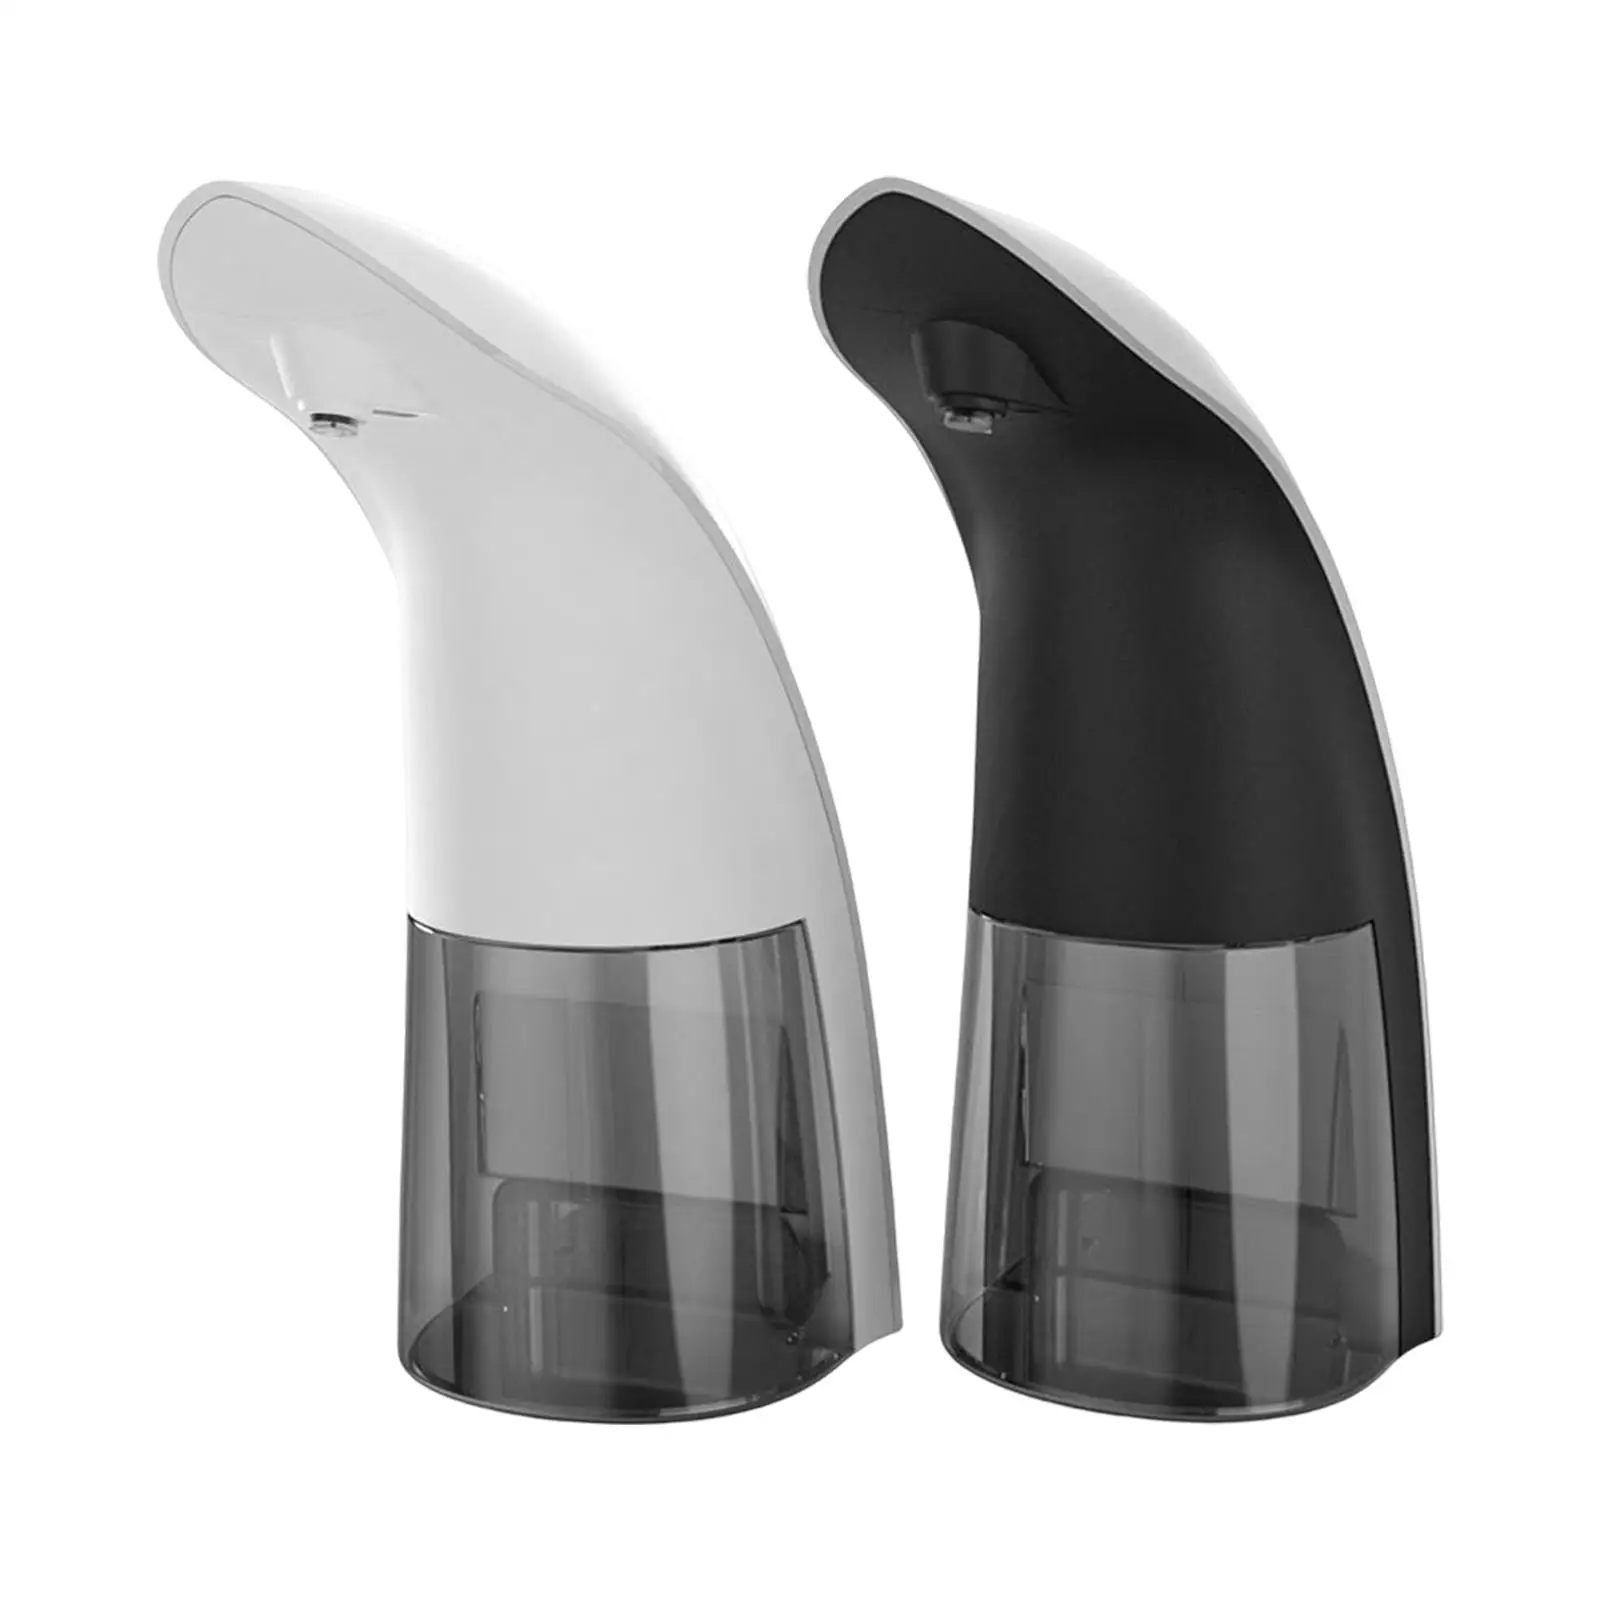 Touchless Liquid Soap Dispenser Hands Free Hand Washer Infrared Sensor Automatic Induction Foam for Bathroom Hotel Toilet